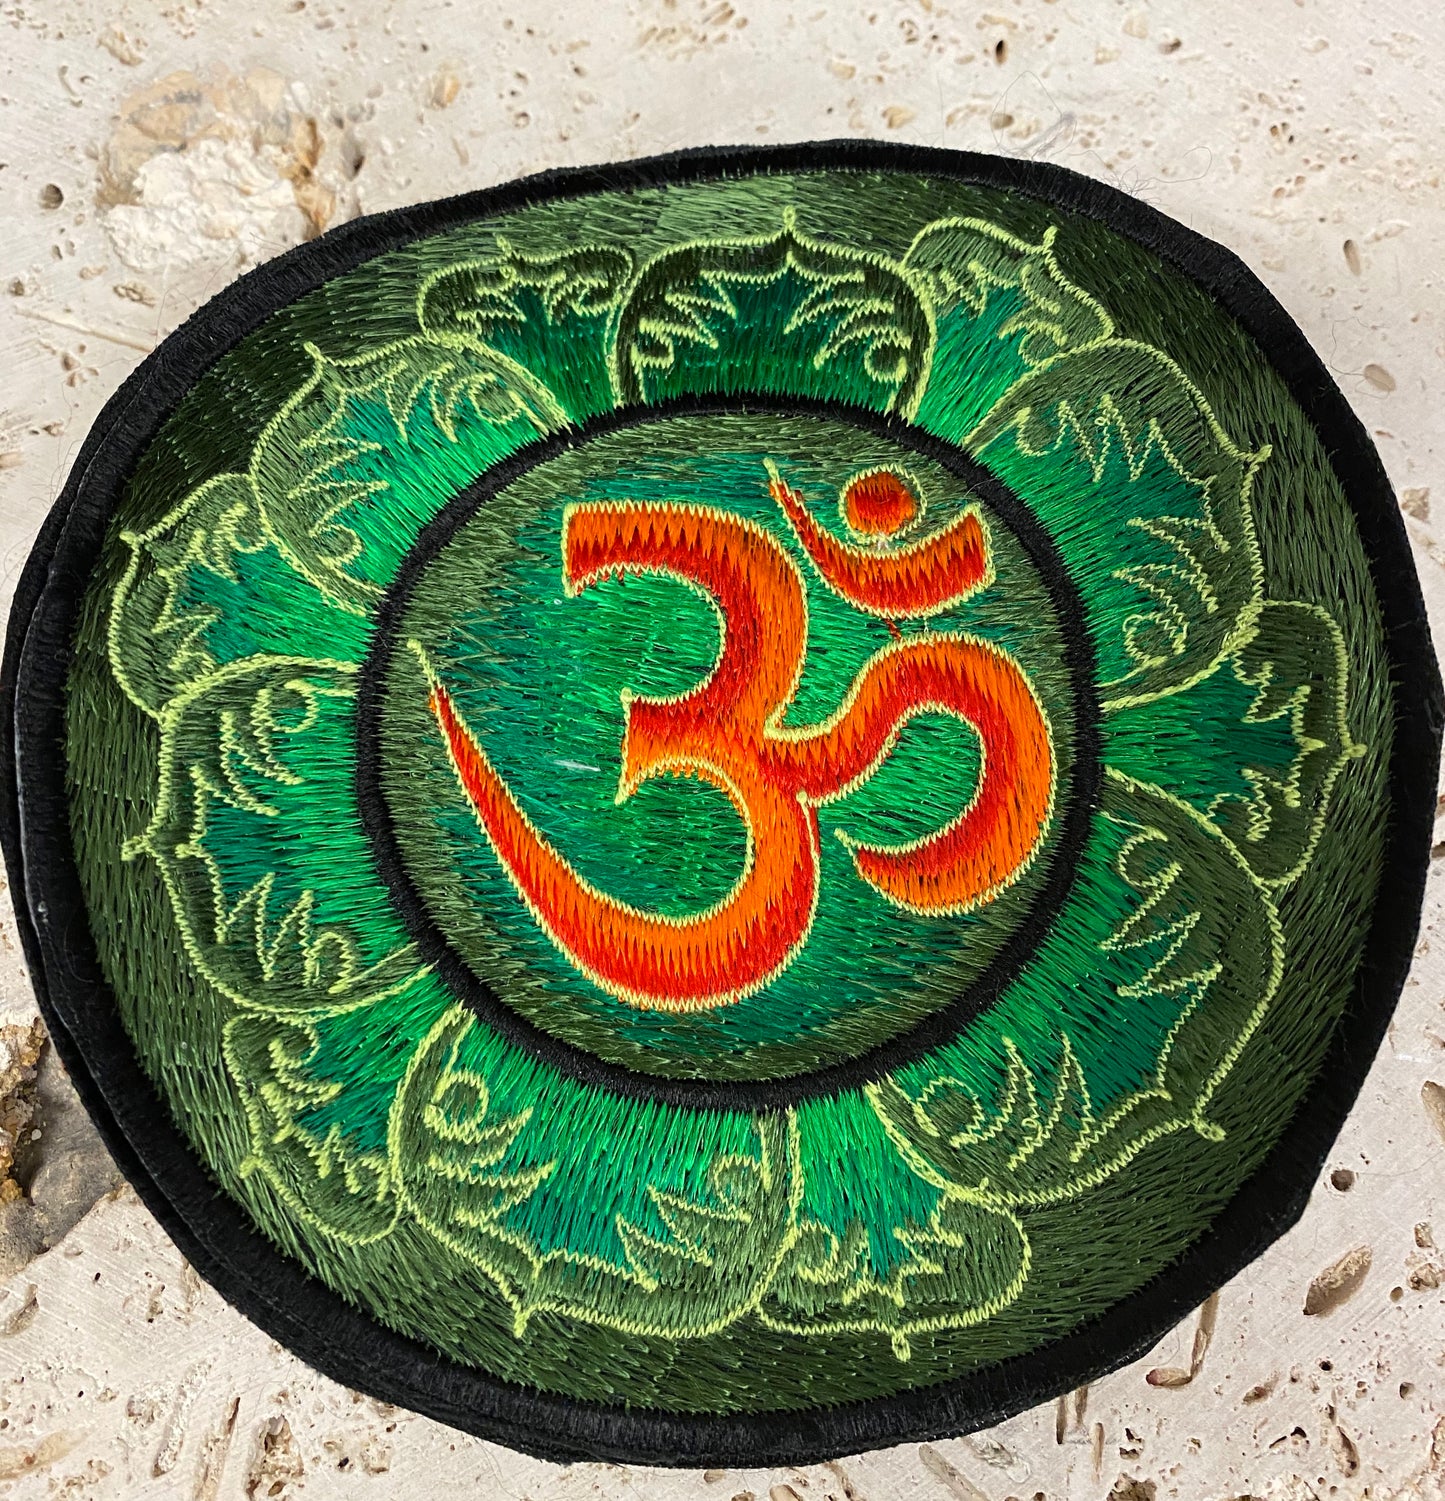 Handmade Green Om Mandala Embroidered Patches